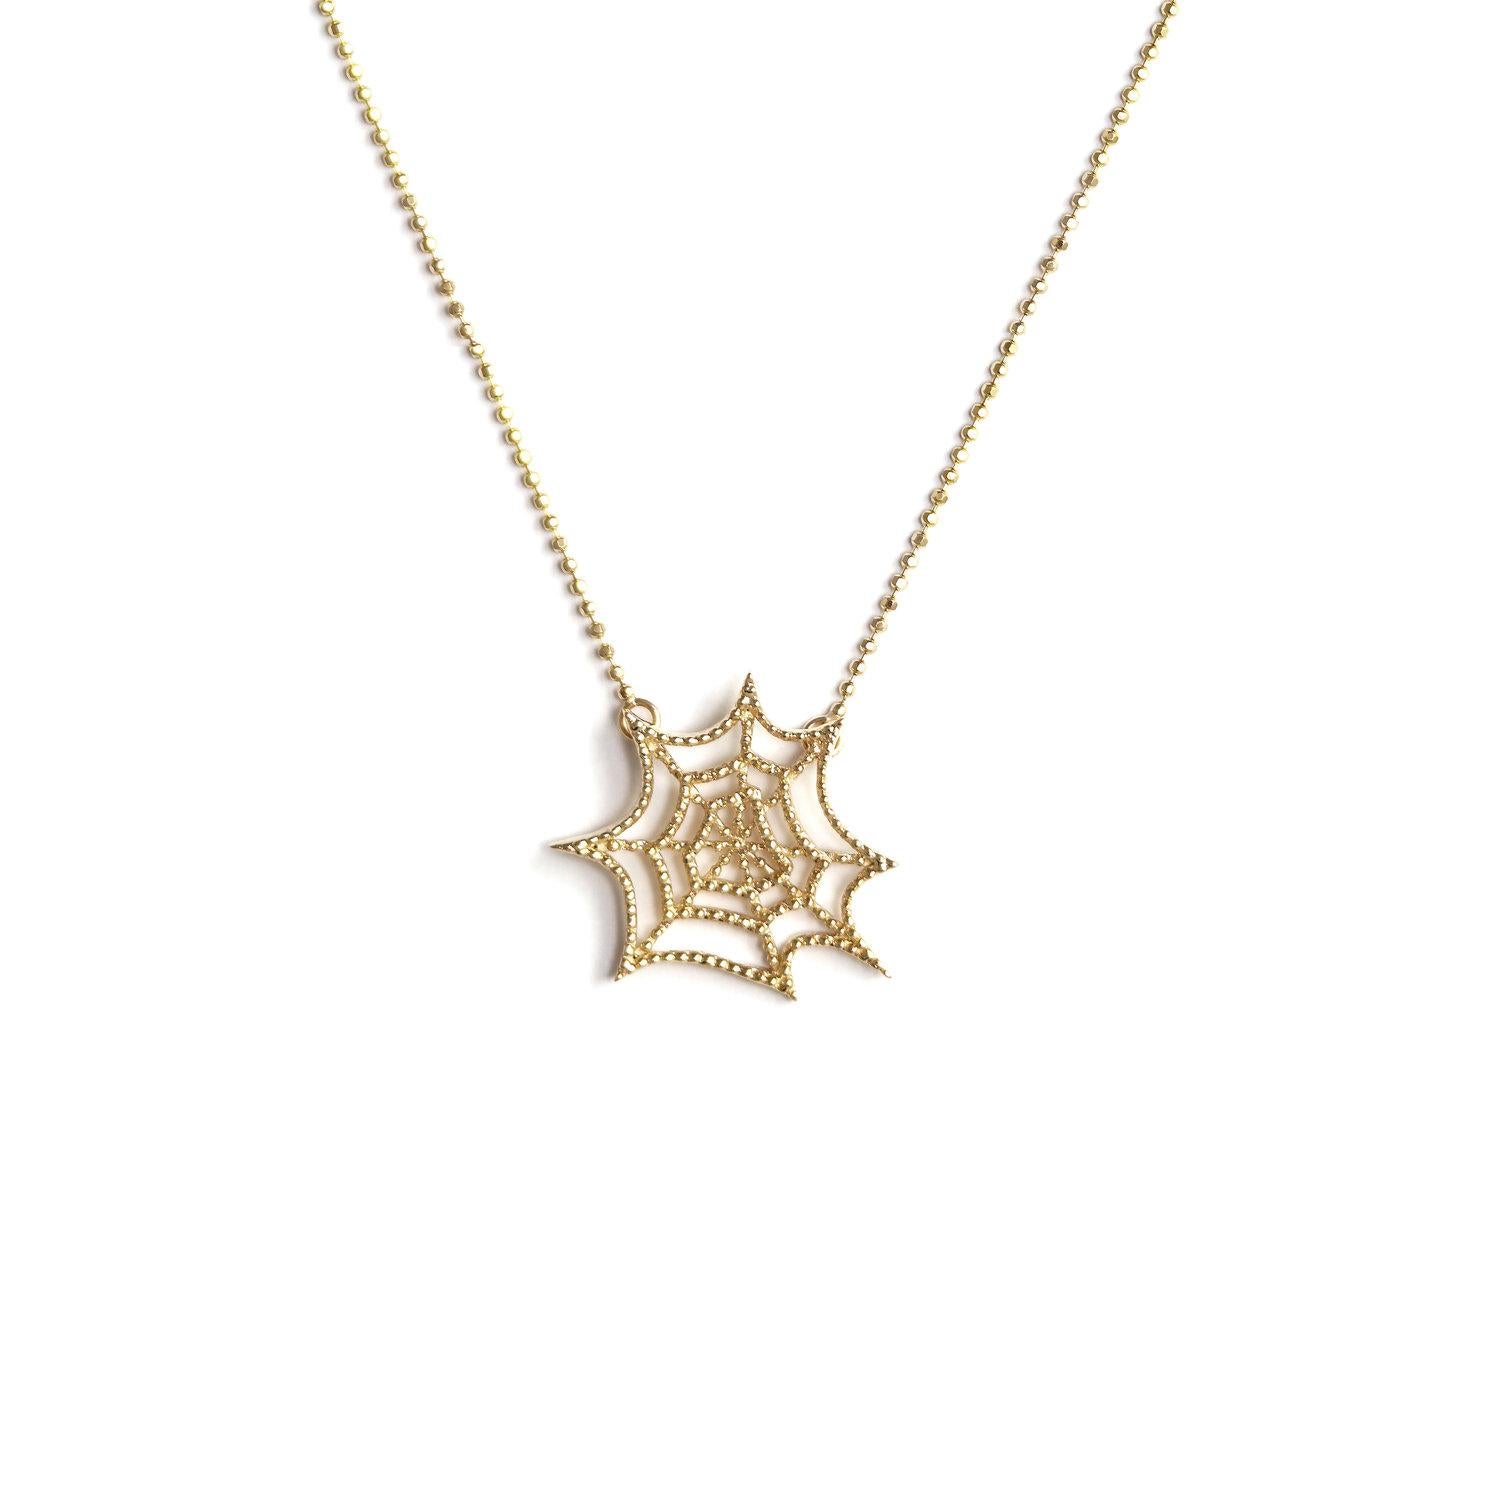 Artist JHERWITT 14k Yellow Gold Plated Spiderweb Pendant Necklace   For Sale